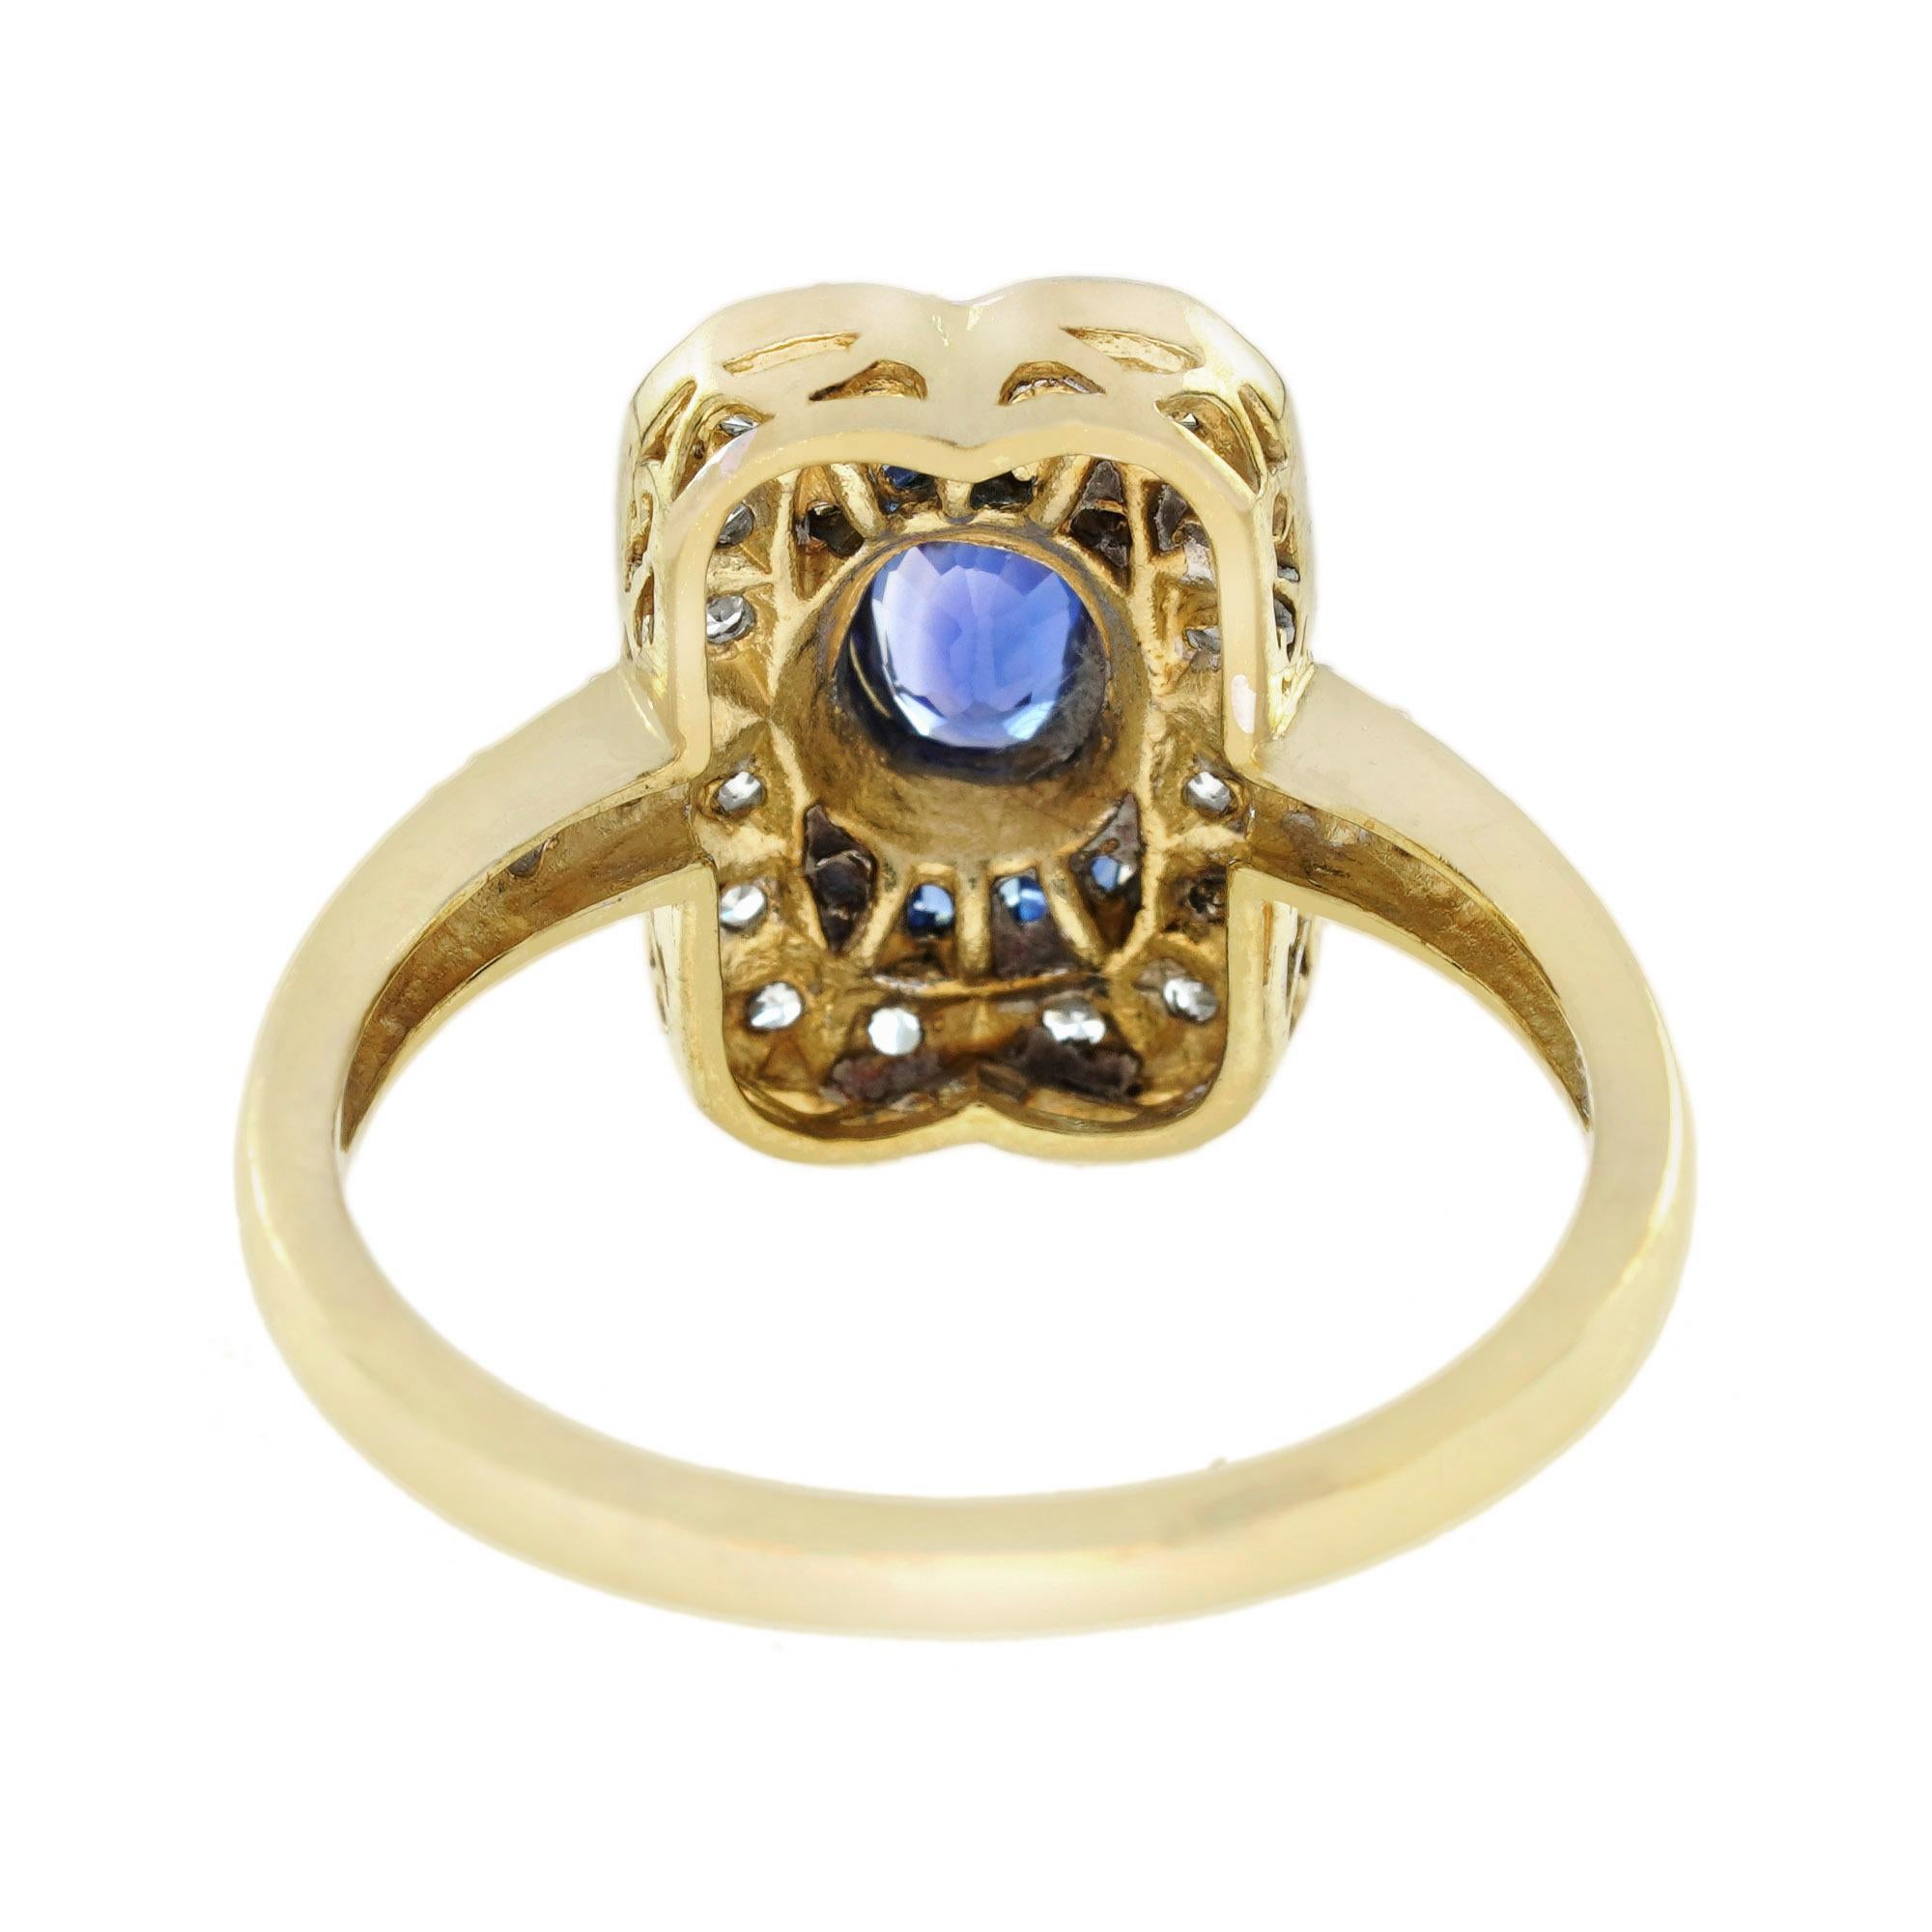 For Sale:  Oval Blue Sapphire and Diamond Art Deco Style Engagement Ring in 14K Gold 5